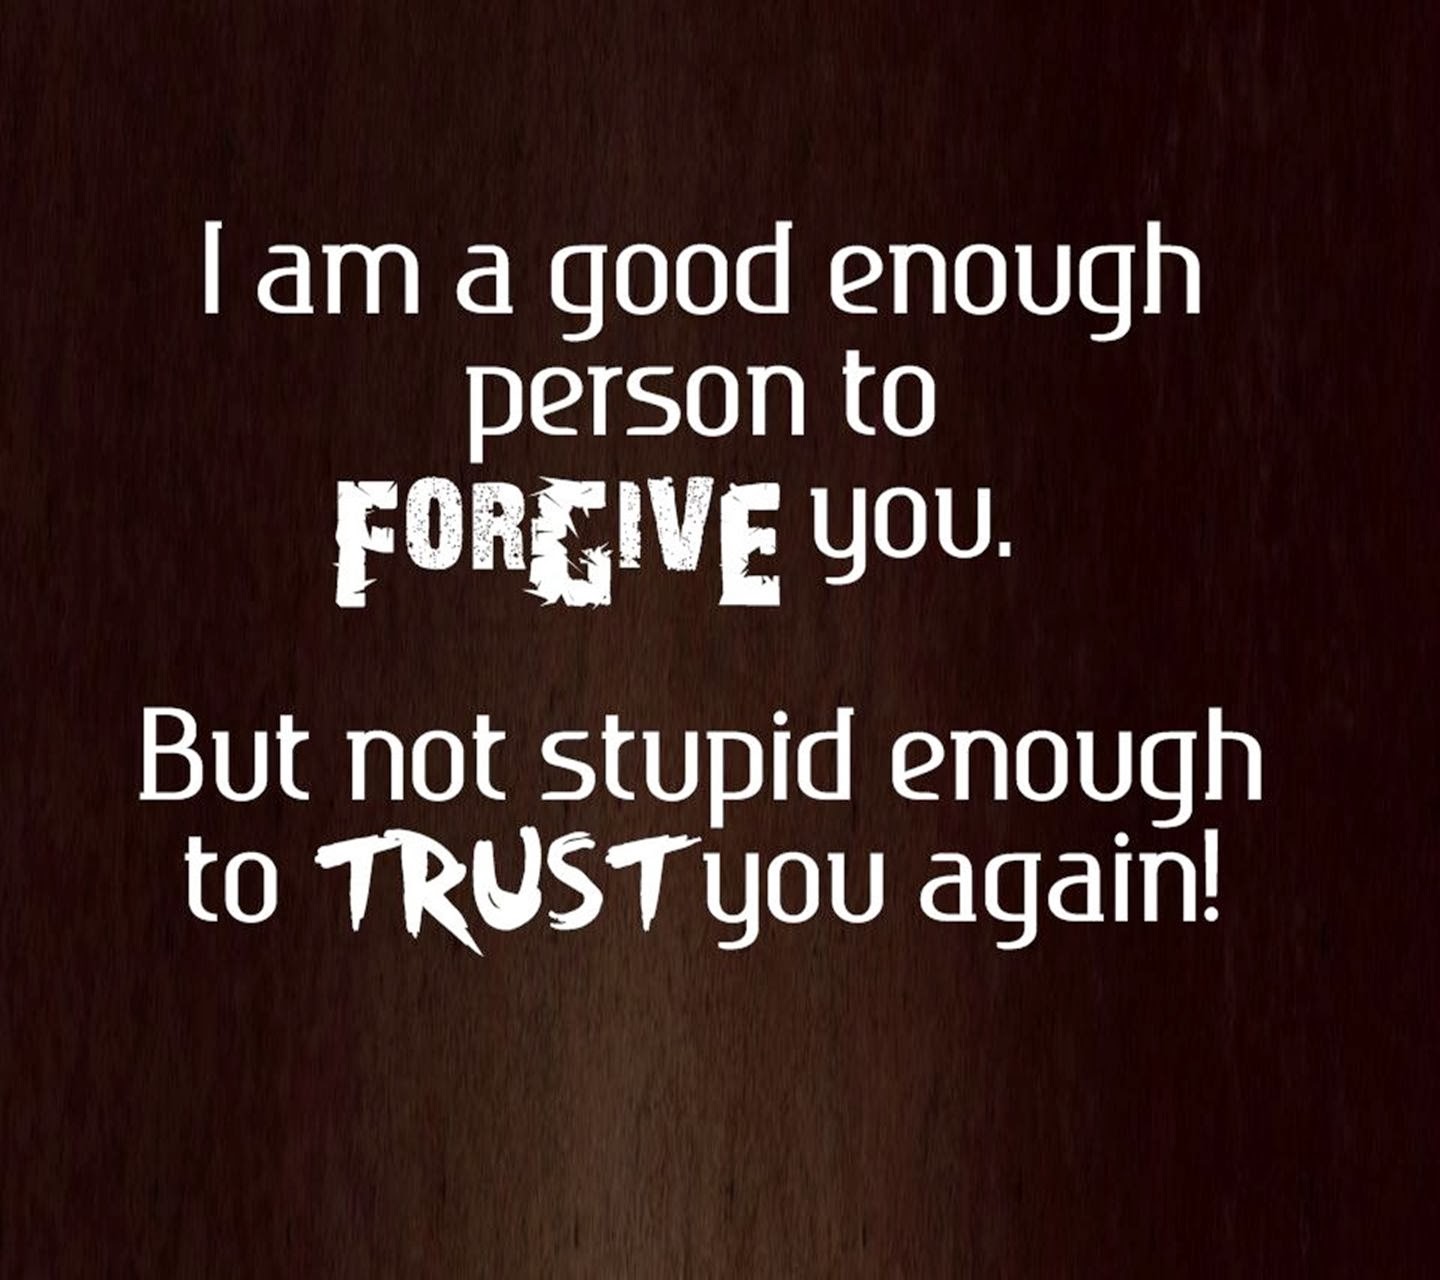 http://best-quotes-and-sayings.blogspot.com/2013/12/trust.html